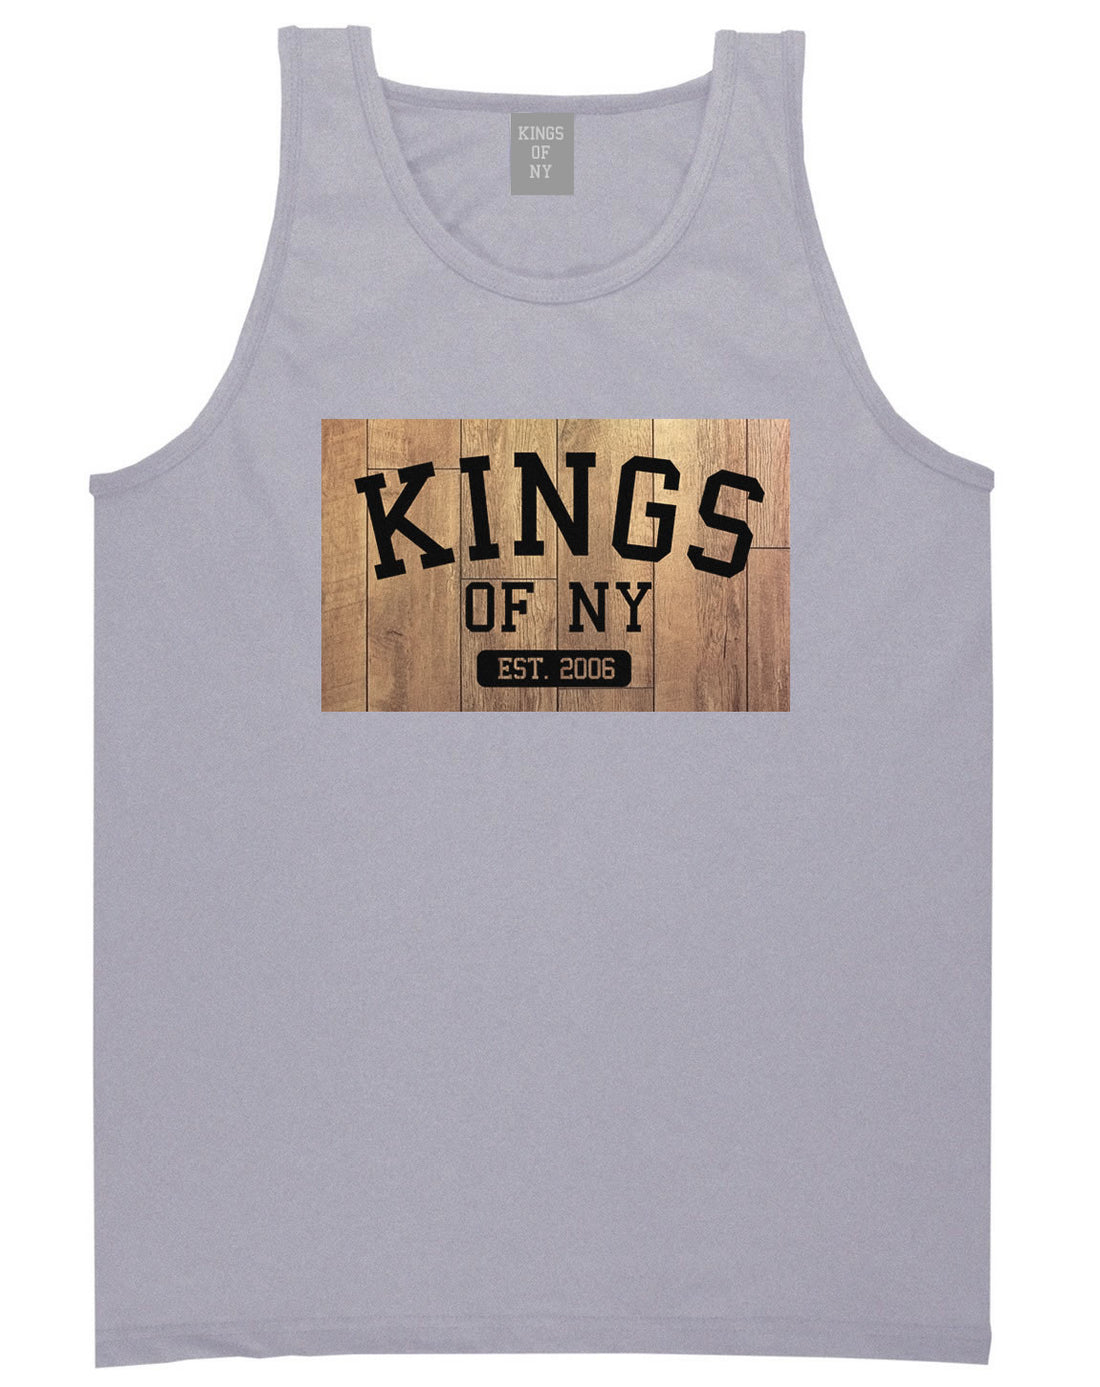 Hardwood Basketball Logo Tank Top in Grey by Kings Of NY